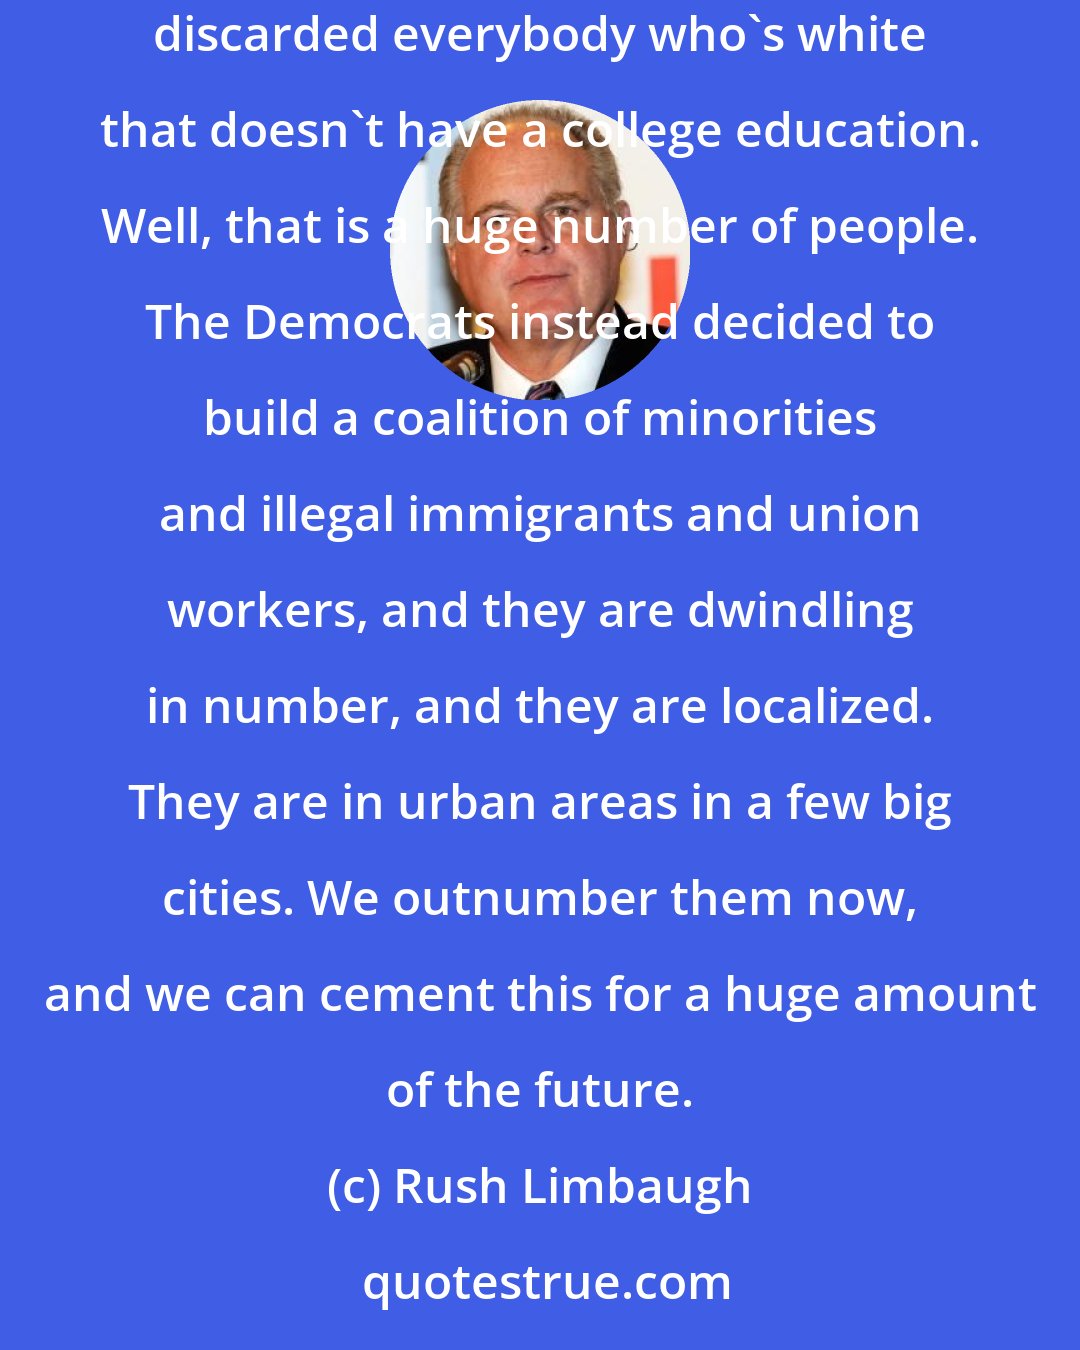 Rush Limbaugh: The Democrat Party coalition has now been outnumbered. The Democrats threw away their allegiance to white working-class voters. They basically discarded everybody who's white that doesn't have a college education. Well, that is a huge number of people. The Democrats instead decided to build a coalition of minorities and illegal immigrants and union workers, and they are dwindling in number, and they are localized. They are in urban areas in a few big cities. We outnumber them now, and we can cement this for a huge amount of the future.